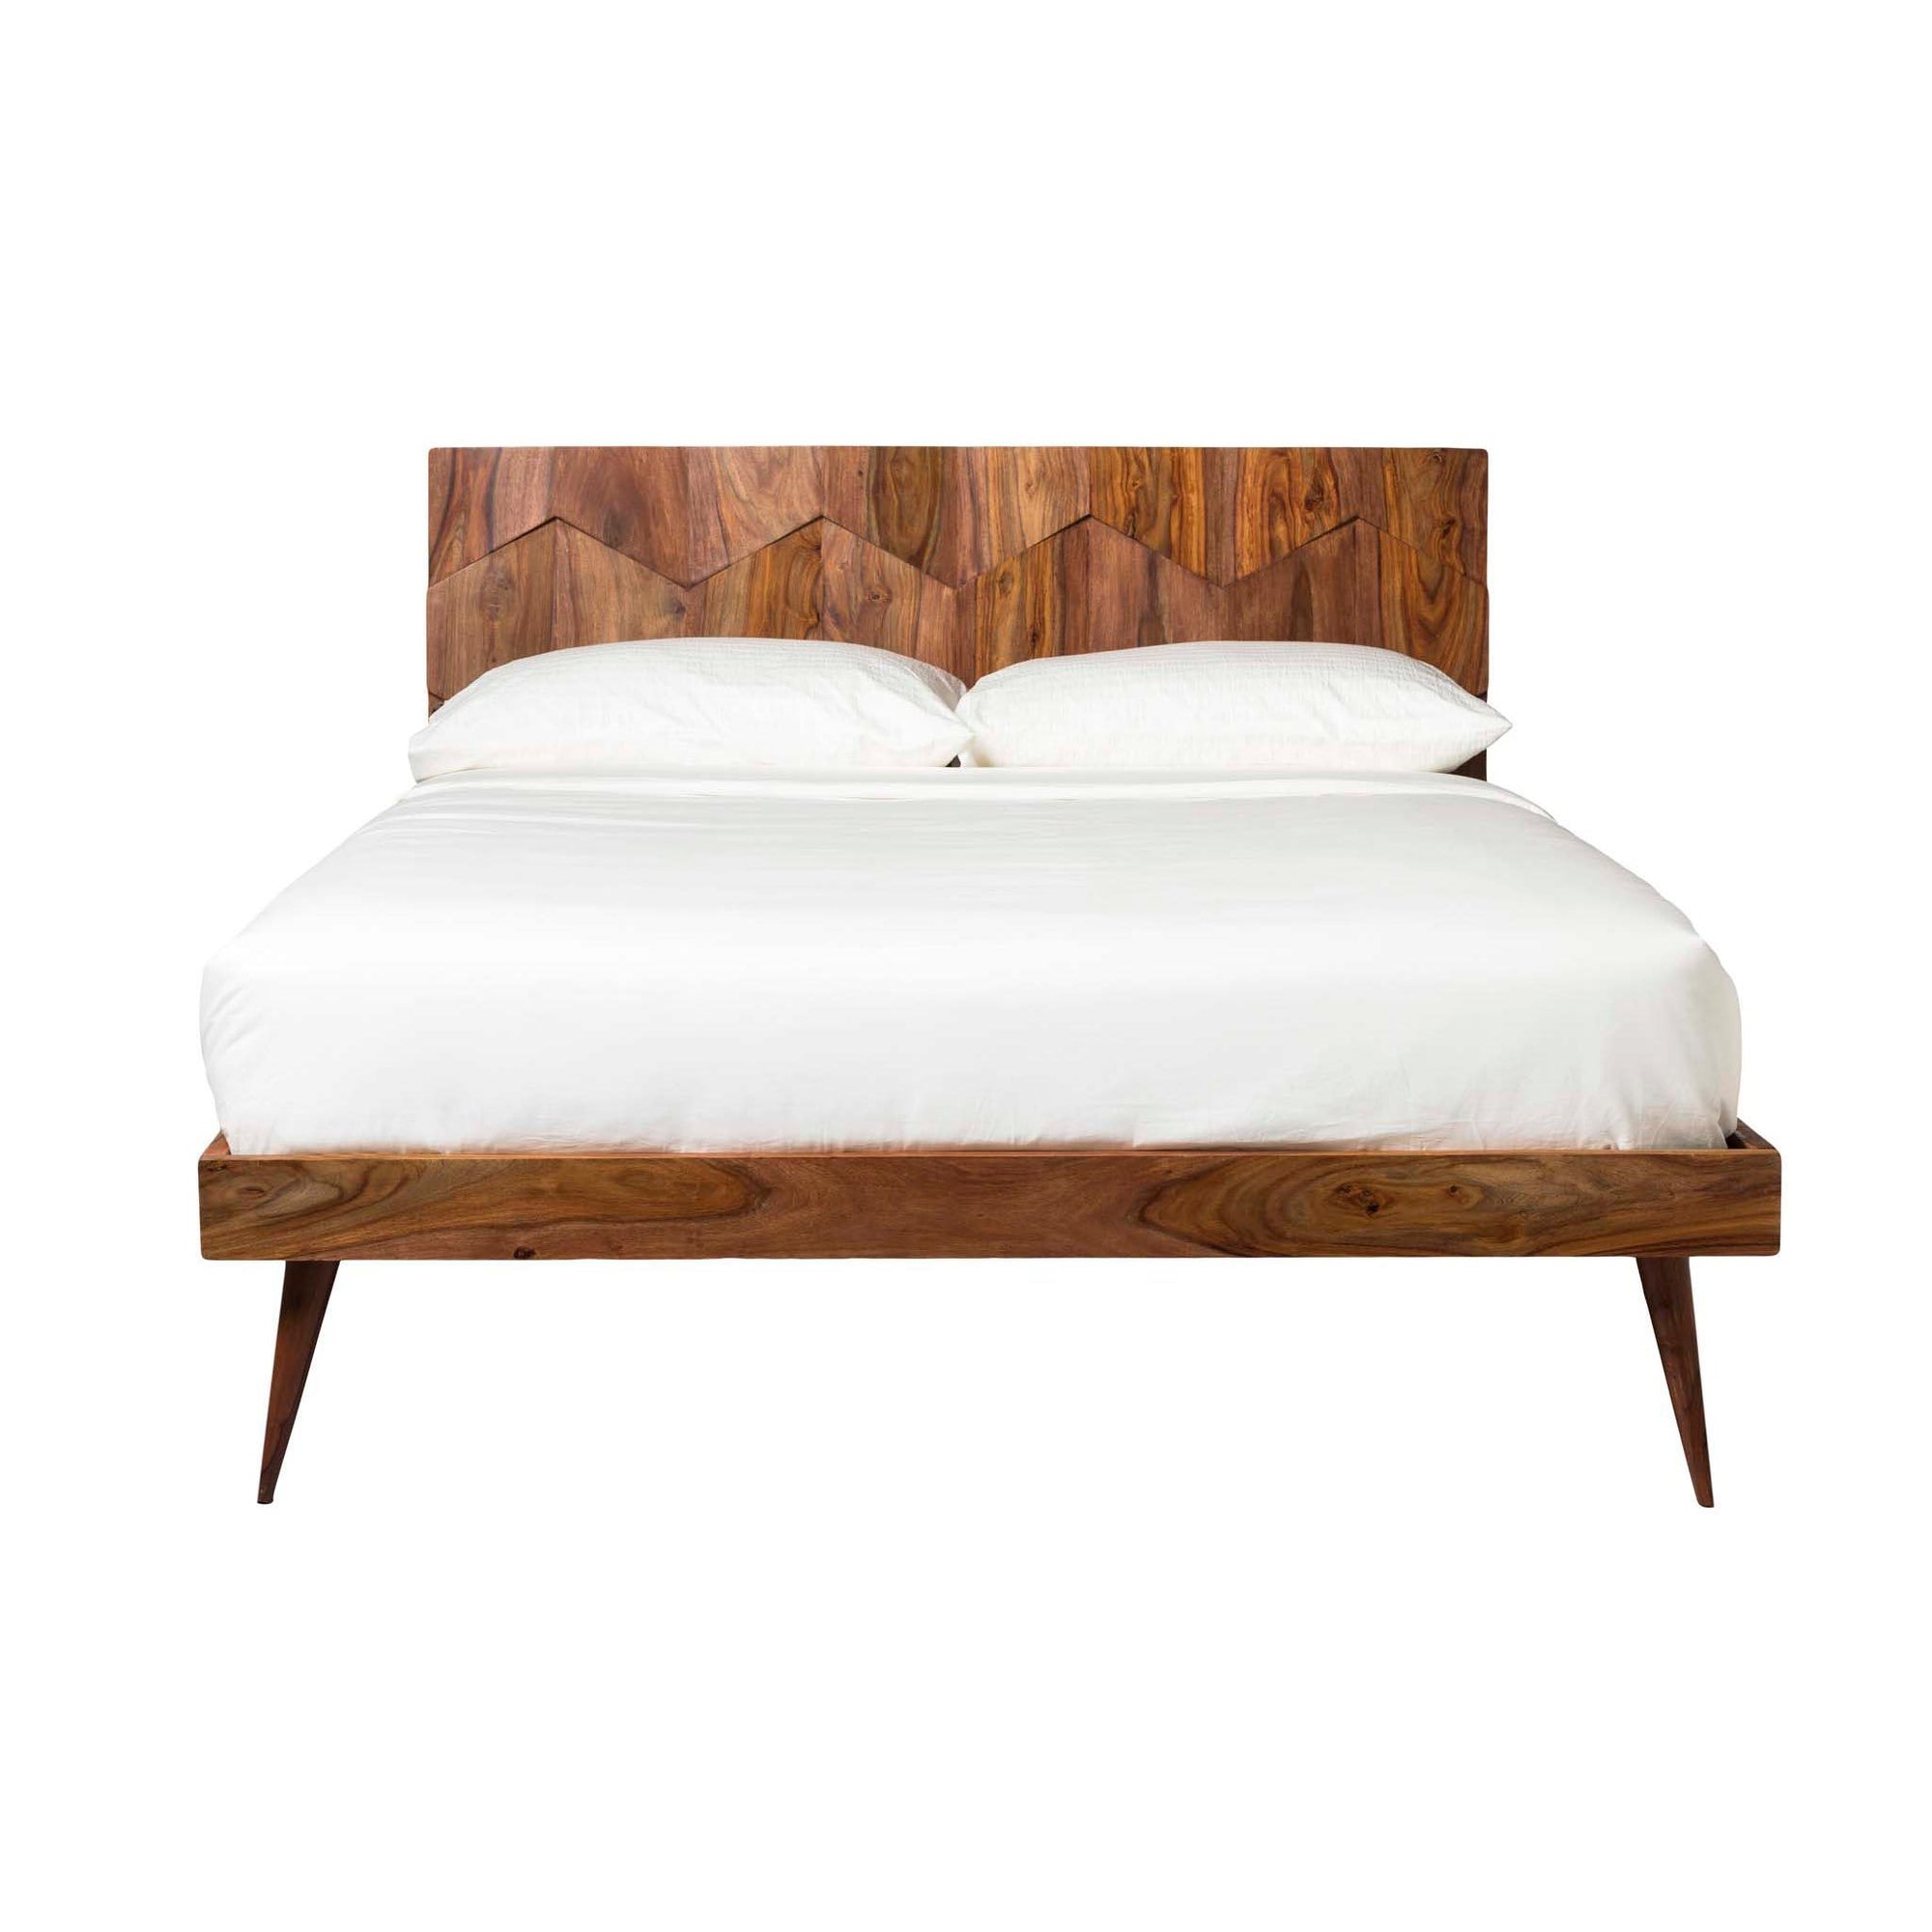 MOES-O2 KING BED-Beds-MODTEMPO